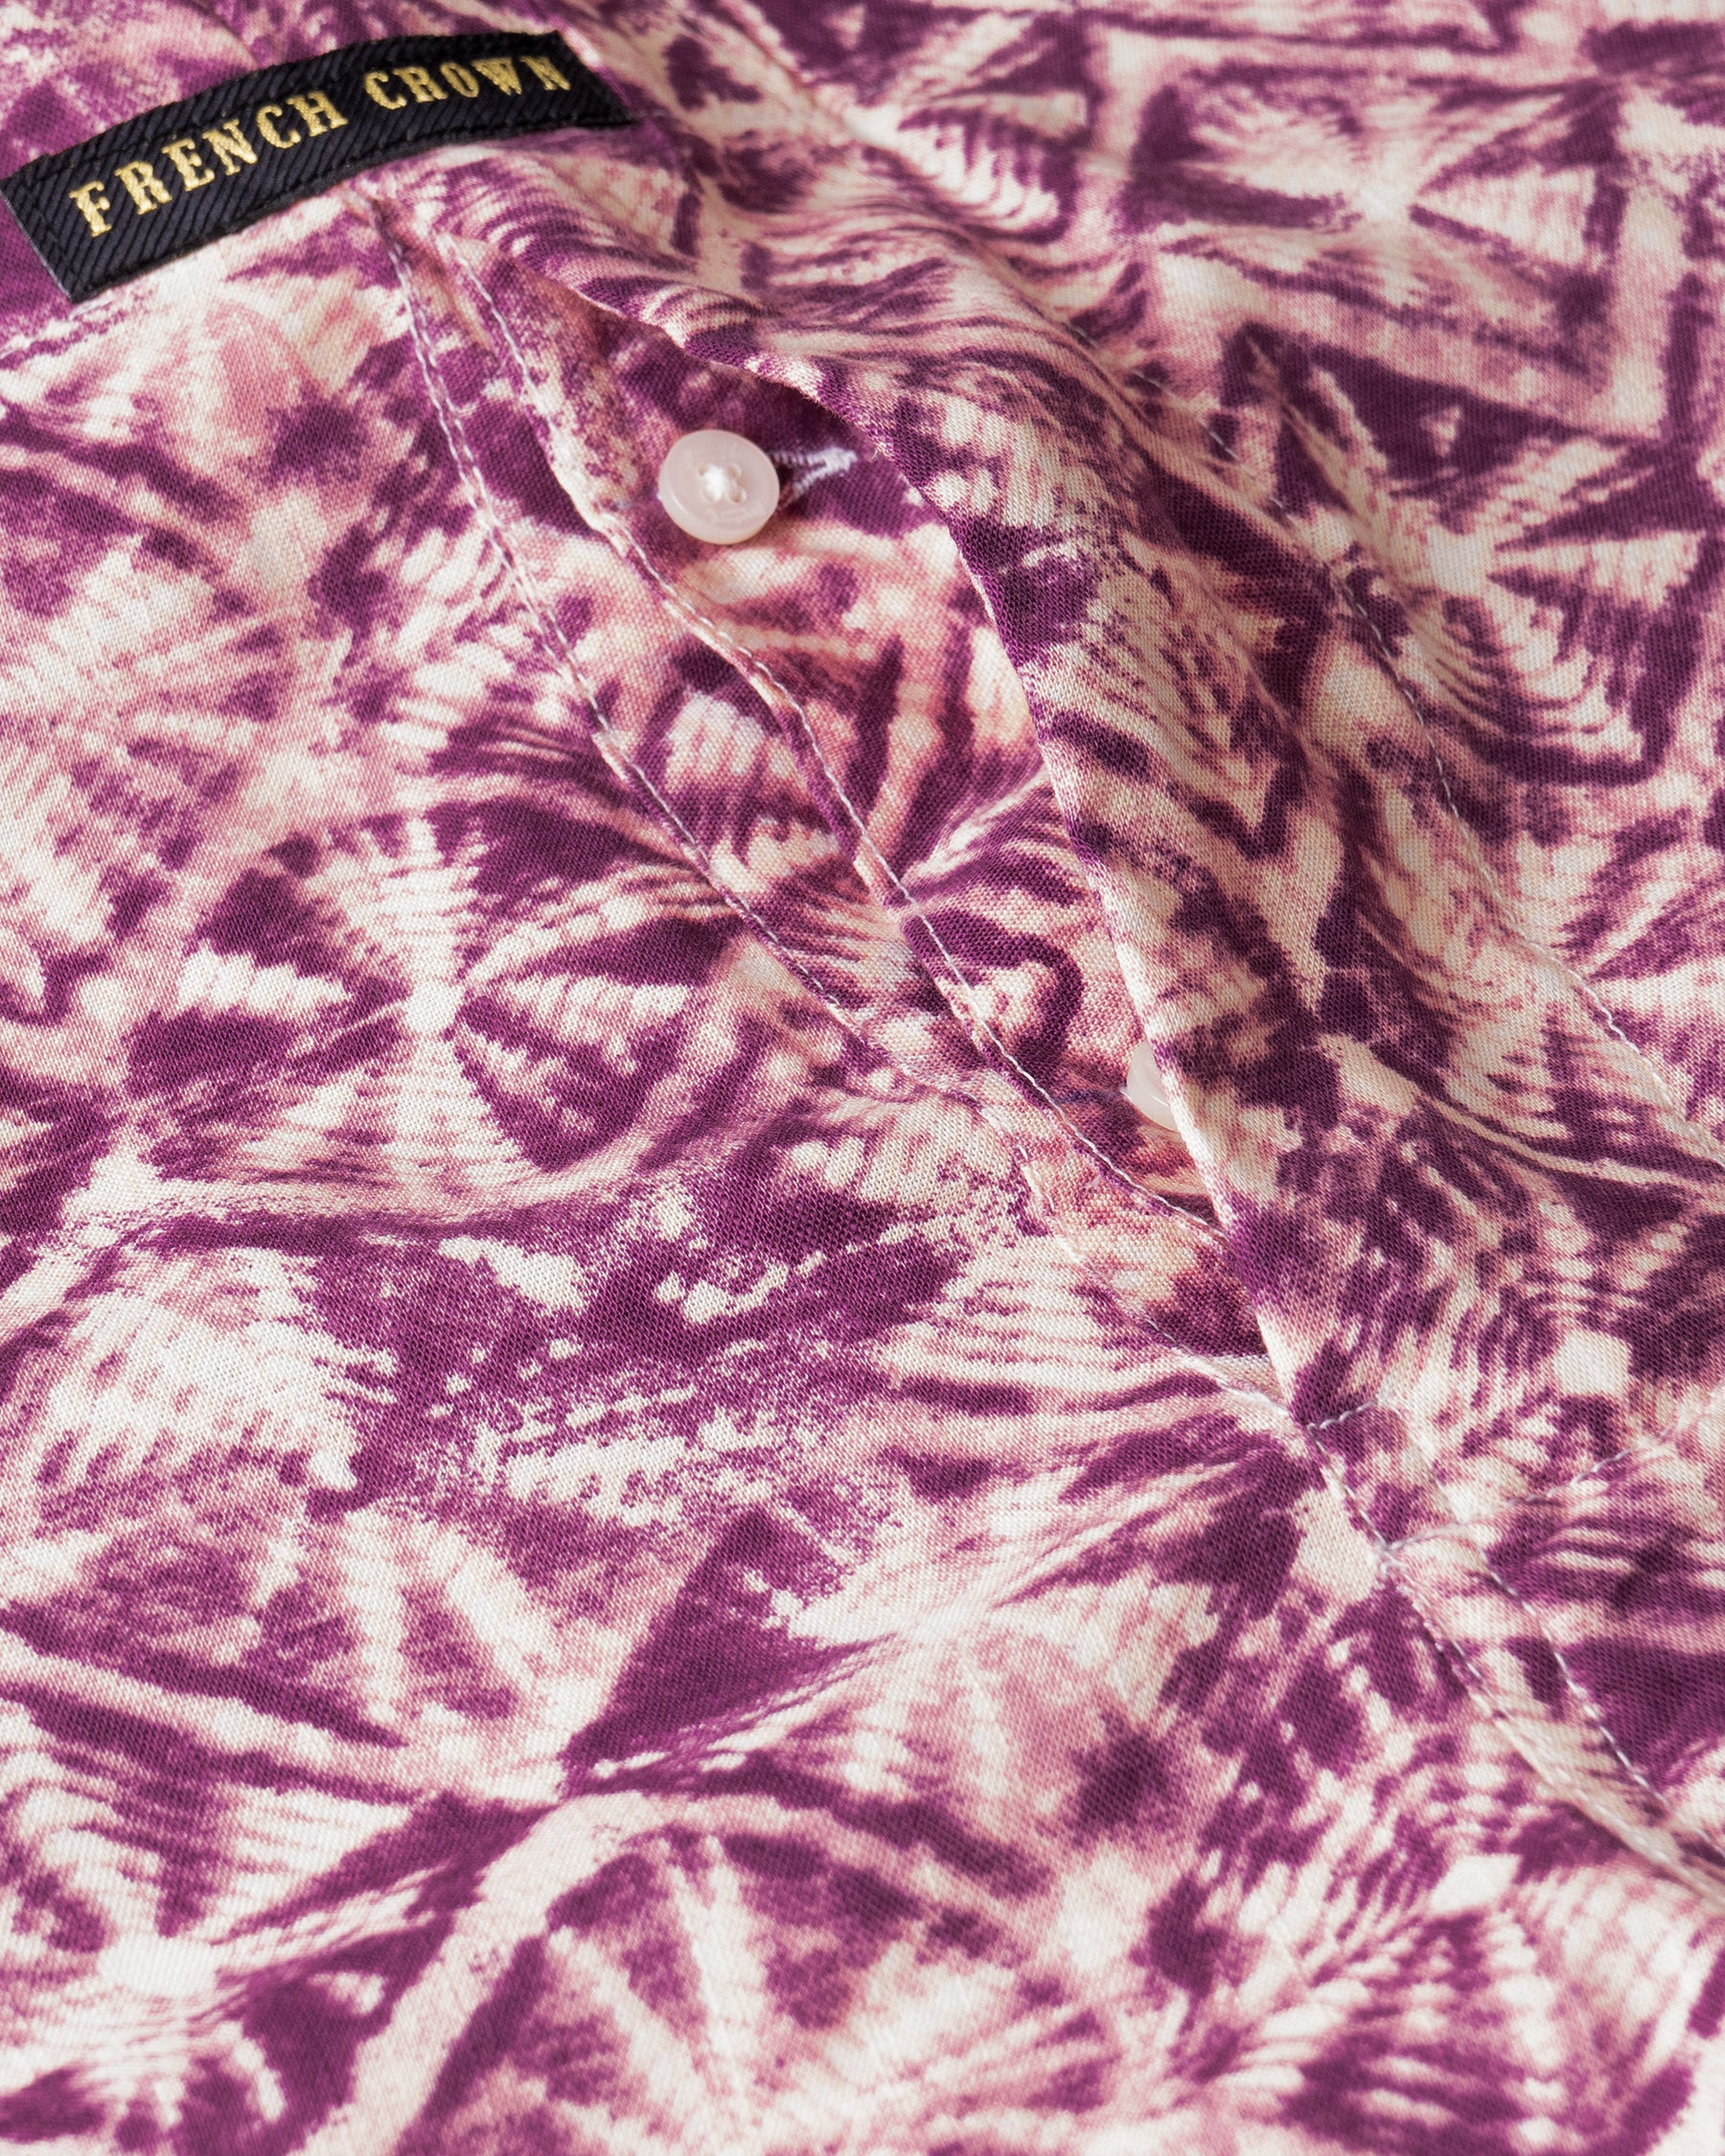 Rouge Pink and Haiti Blue Flowery Printed Tencel Boxers BX369-28, BX369-30, BX369-32, BX369-34, BX369-36, BX369-38, BX369-40, BX369-42, BX369-44